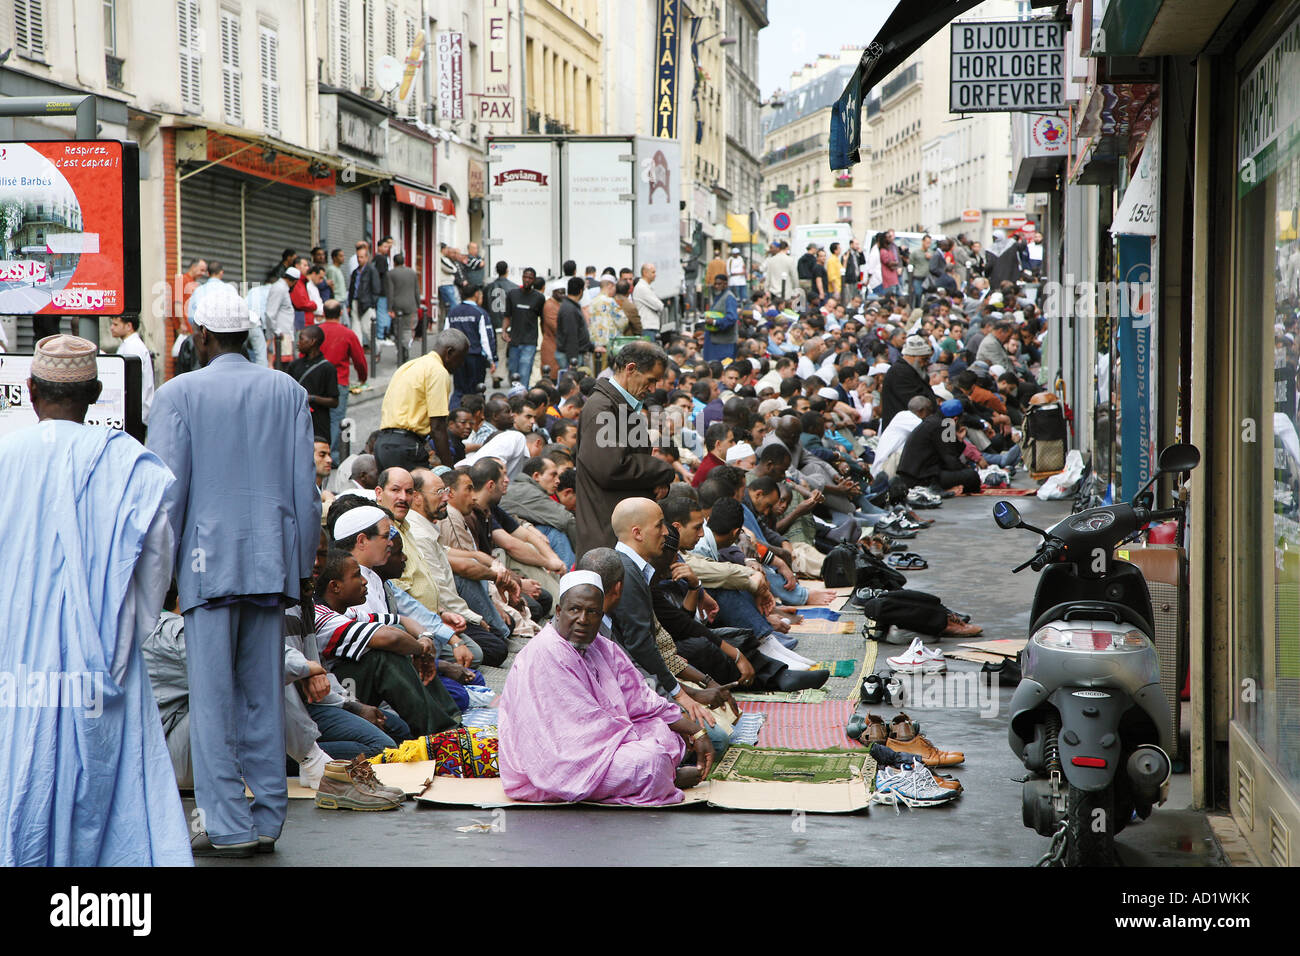 muslims-pray-out-the-mosque-in-the-barbs-rochechouart-district-of-AD1WKK.jpg